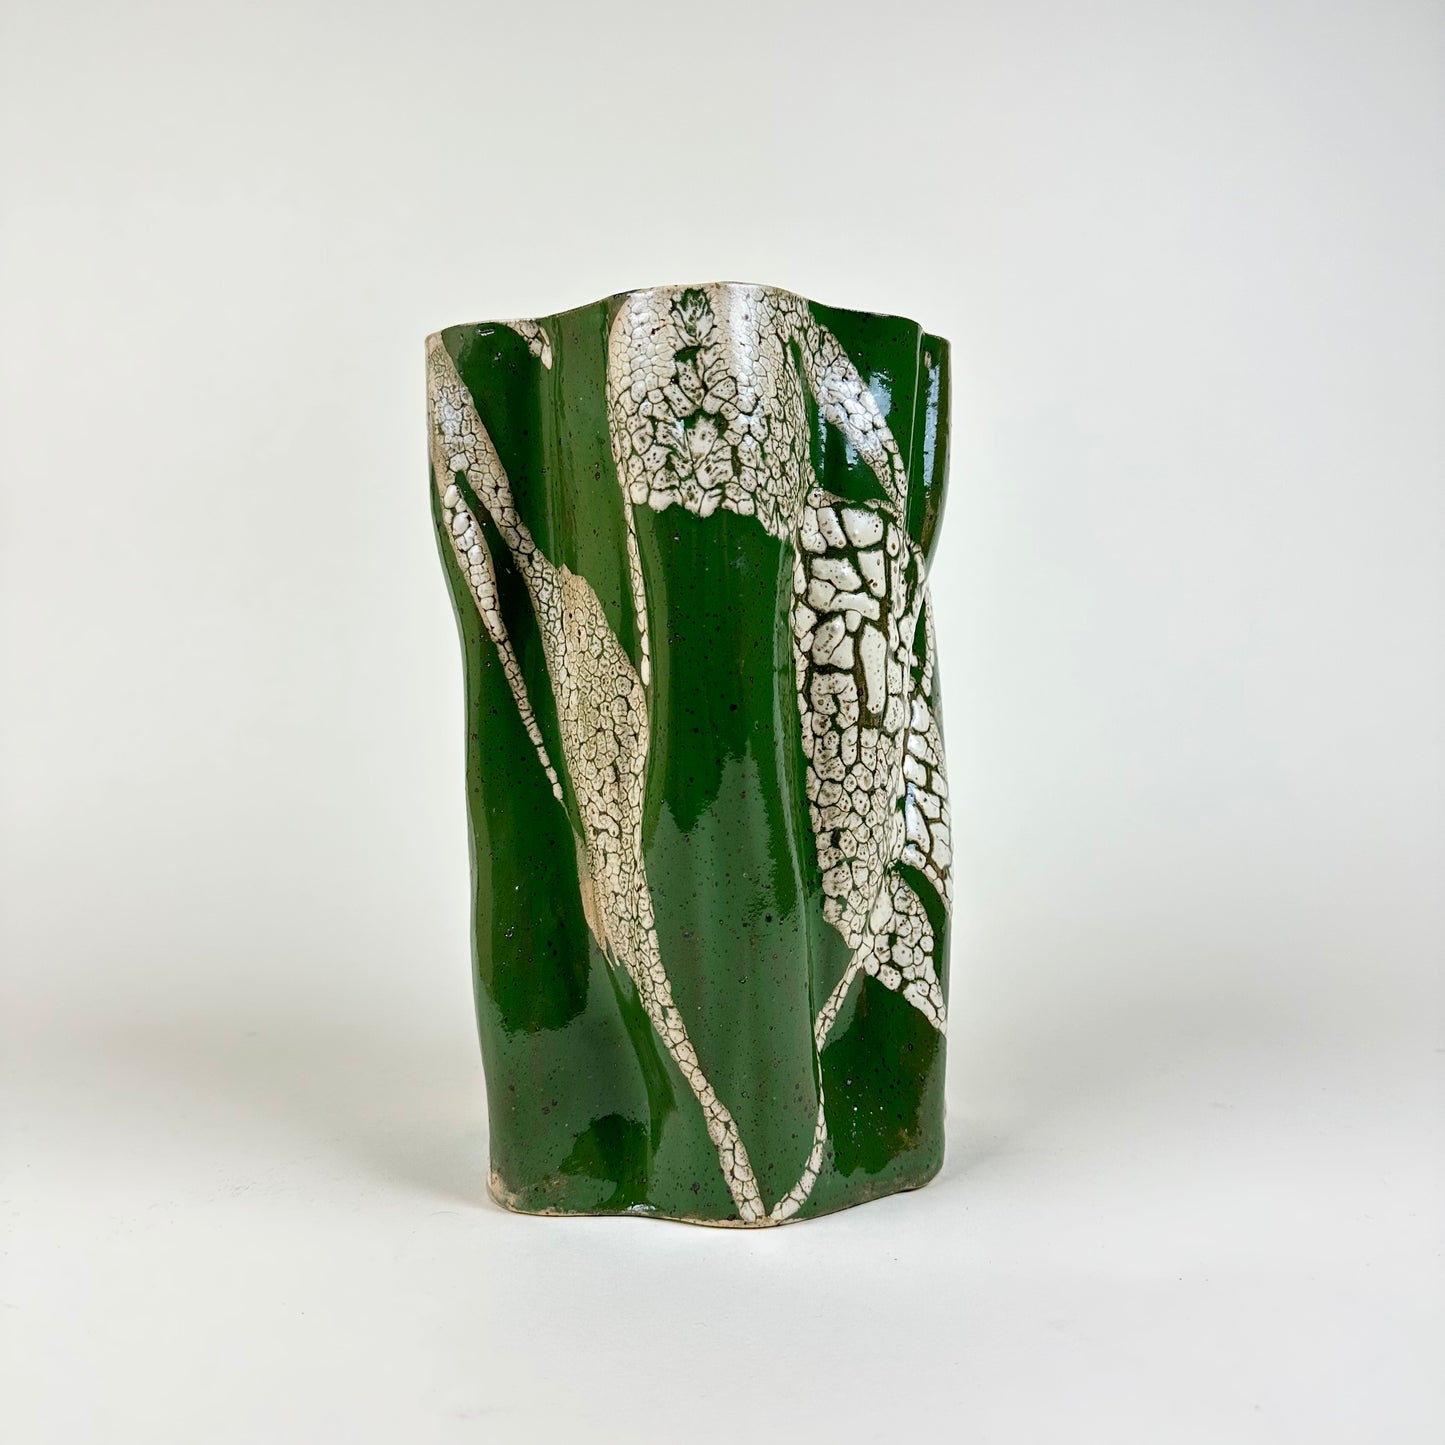 Ceramic vase, green and white, by Astrid Öhman